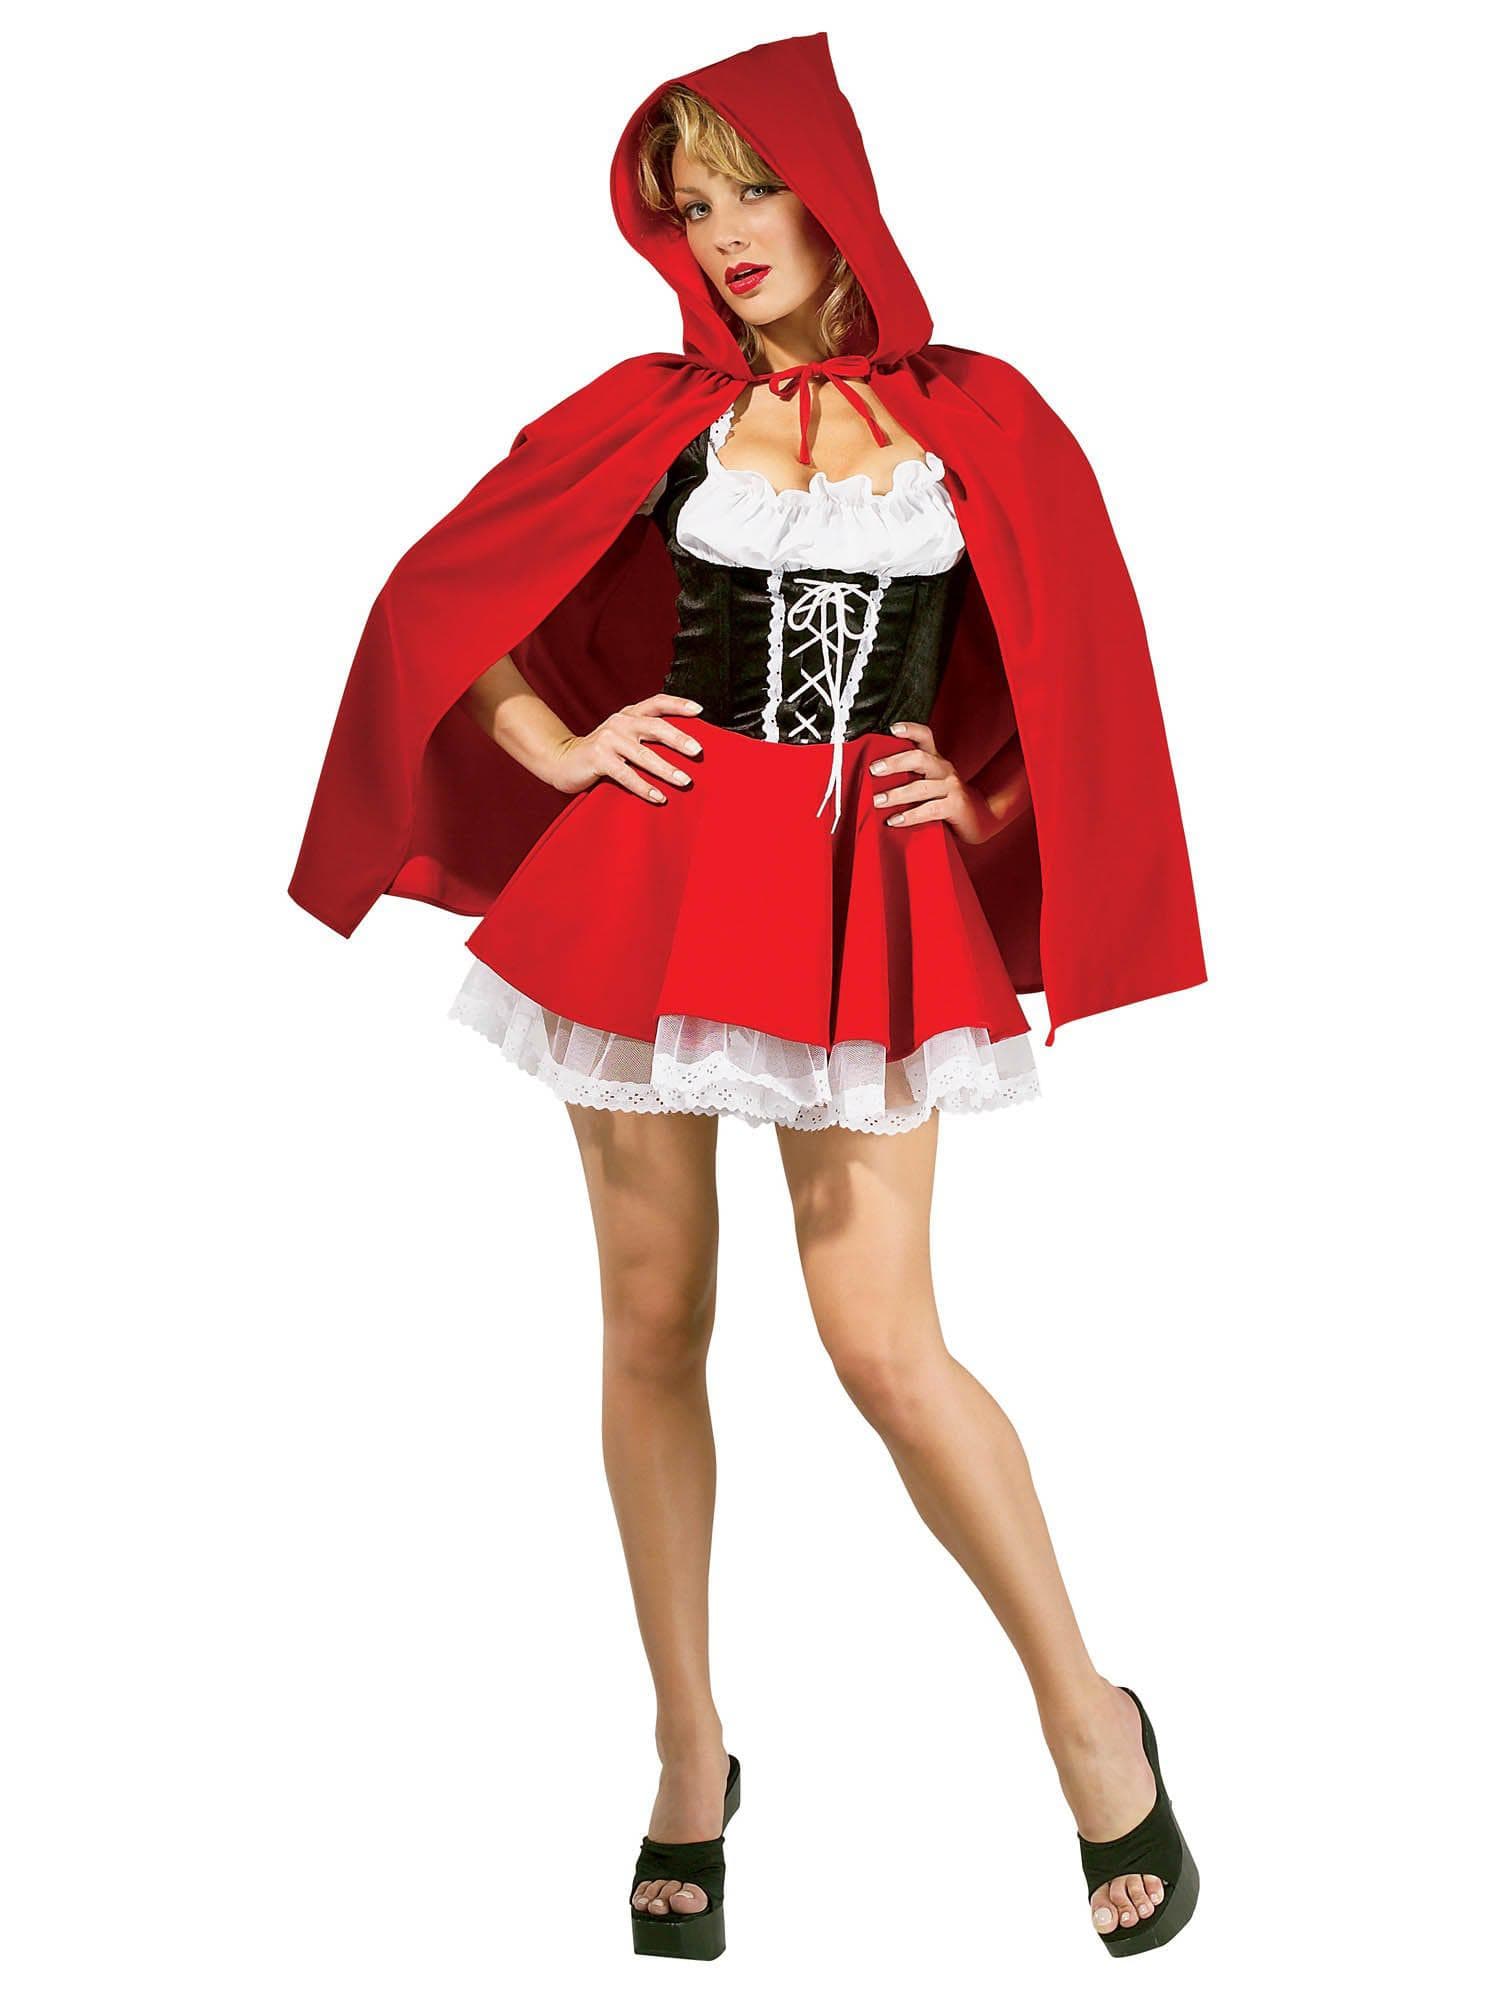 Adult Red Riding Hood Costume - costumes.com